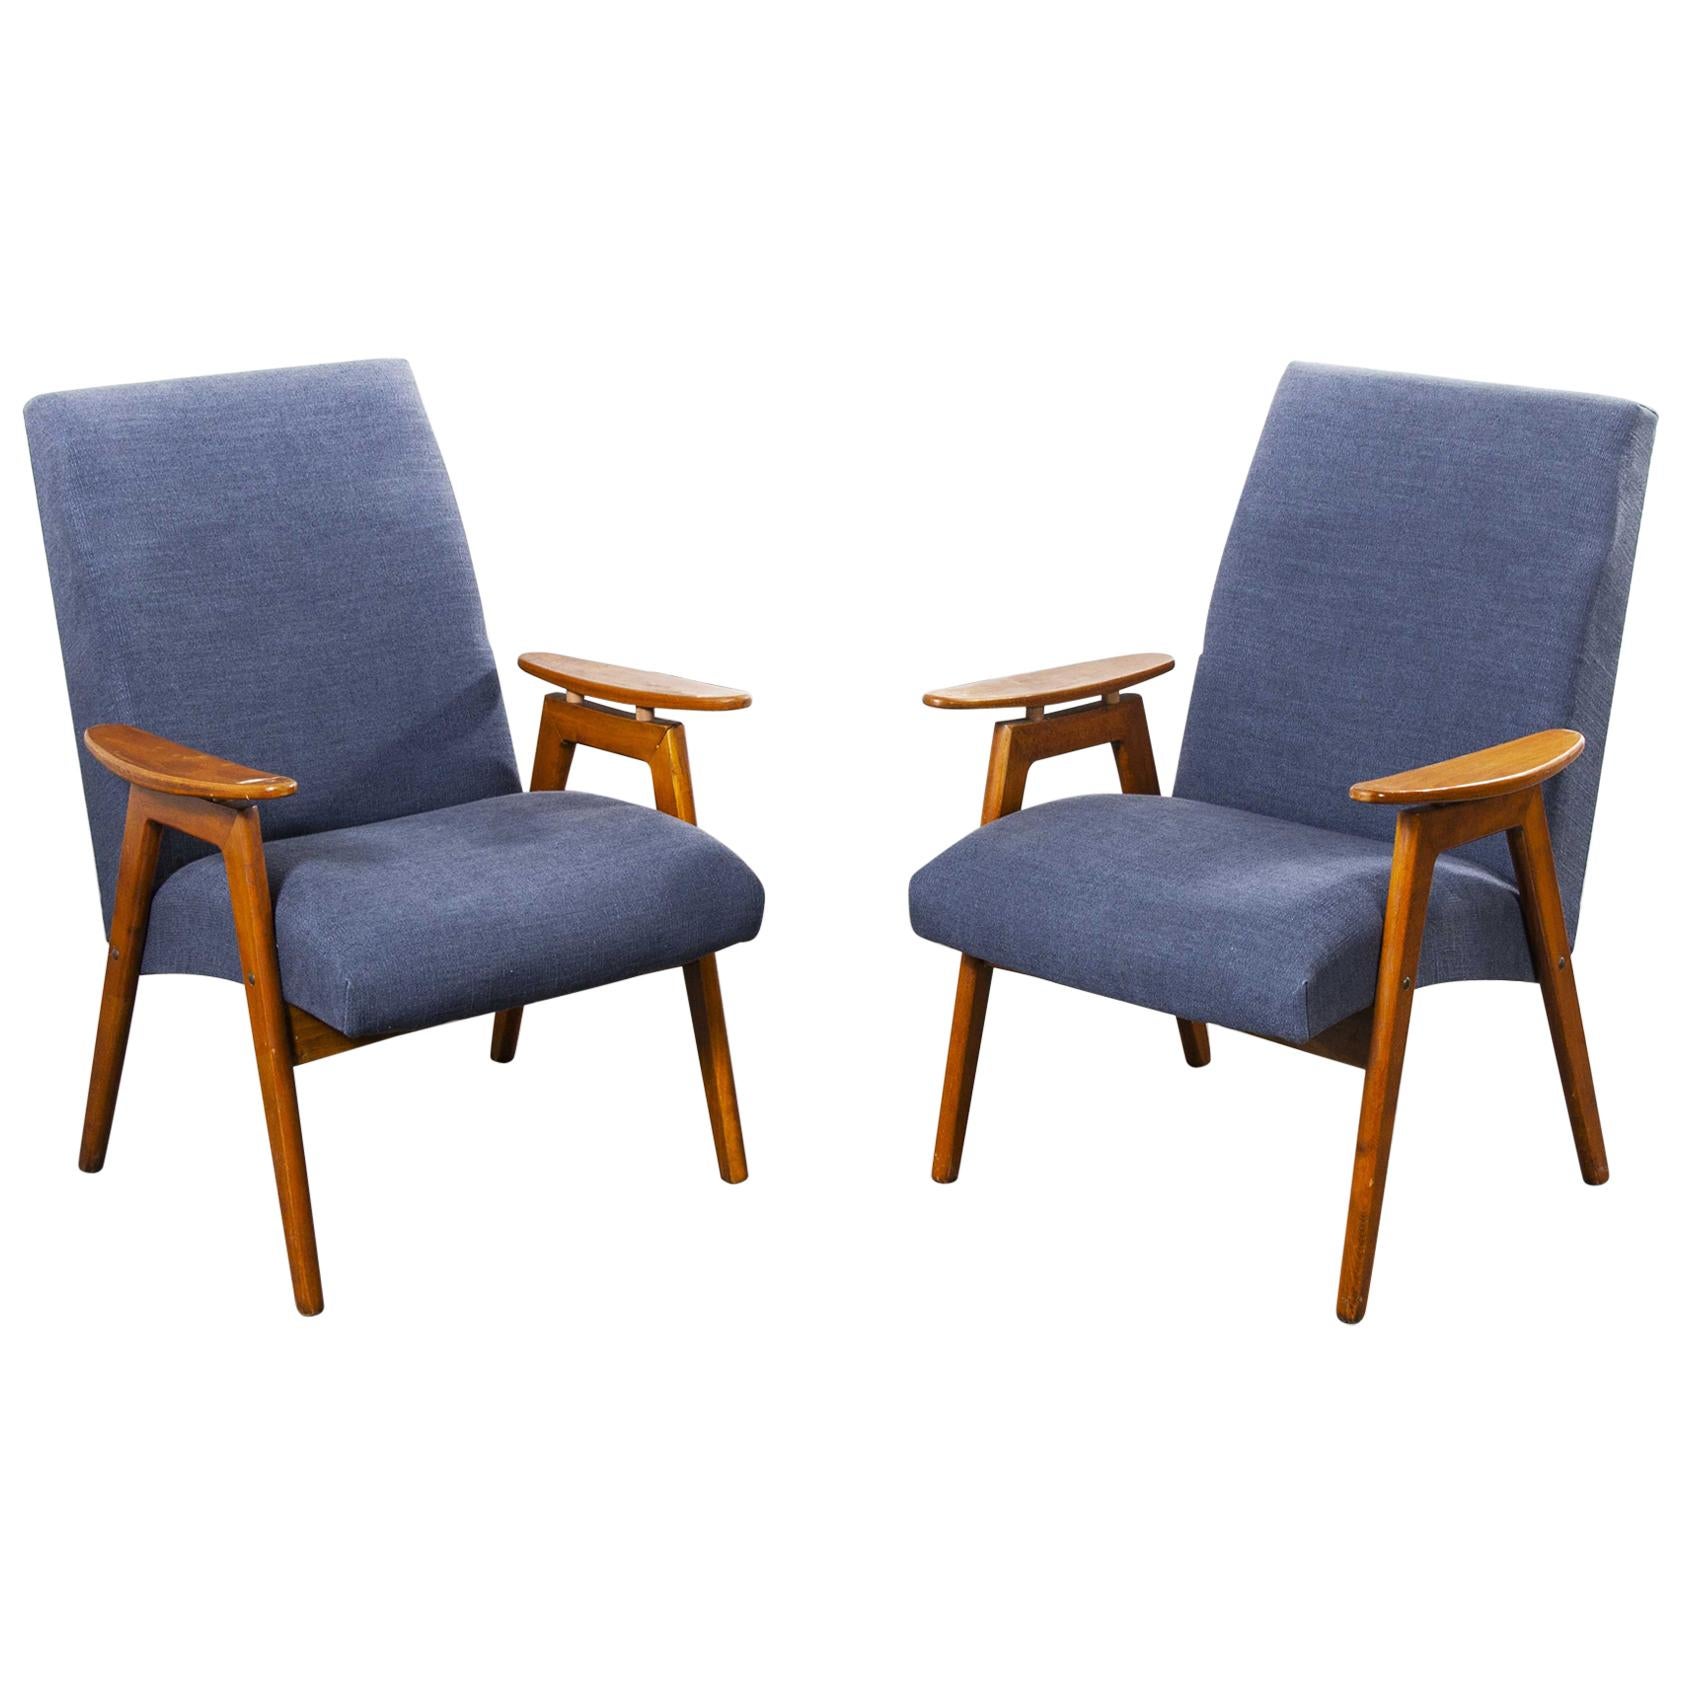 1950s Midcentury Pair of Armchairs, Blue Cotton Linen Upholstery